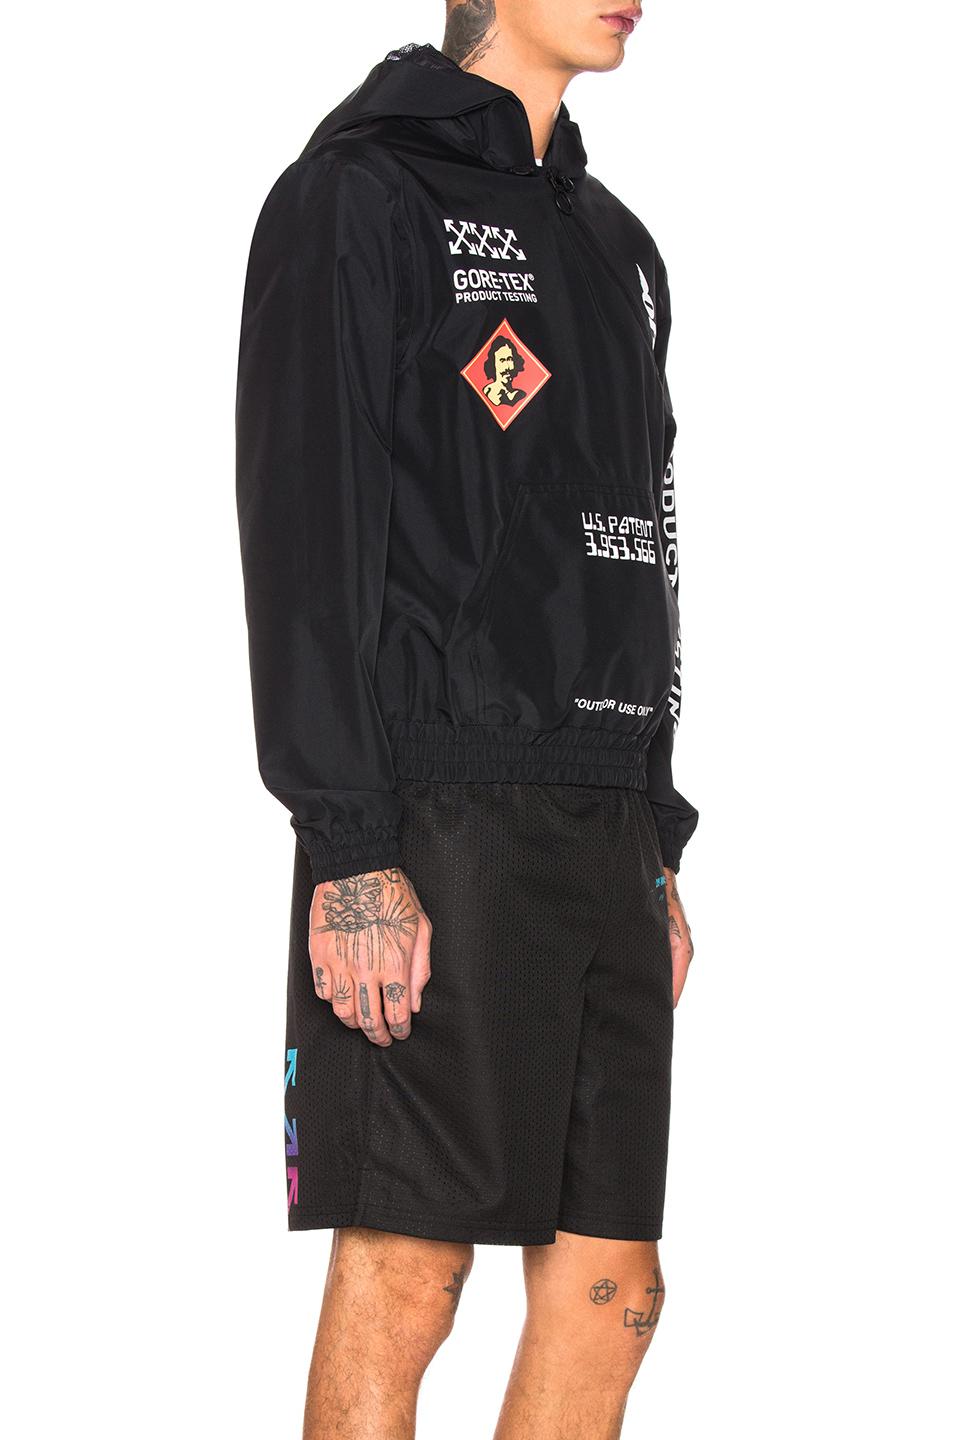 Off-White c/o Virgil Abloh Synthetic Gore-tex® Hoodie in Black for Men